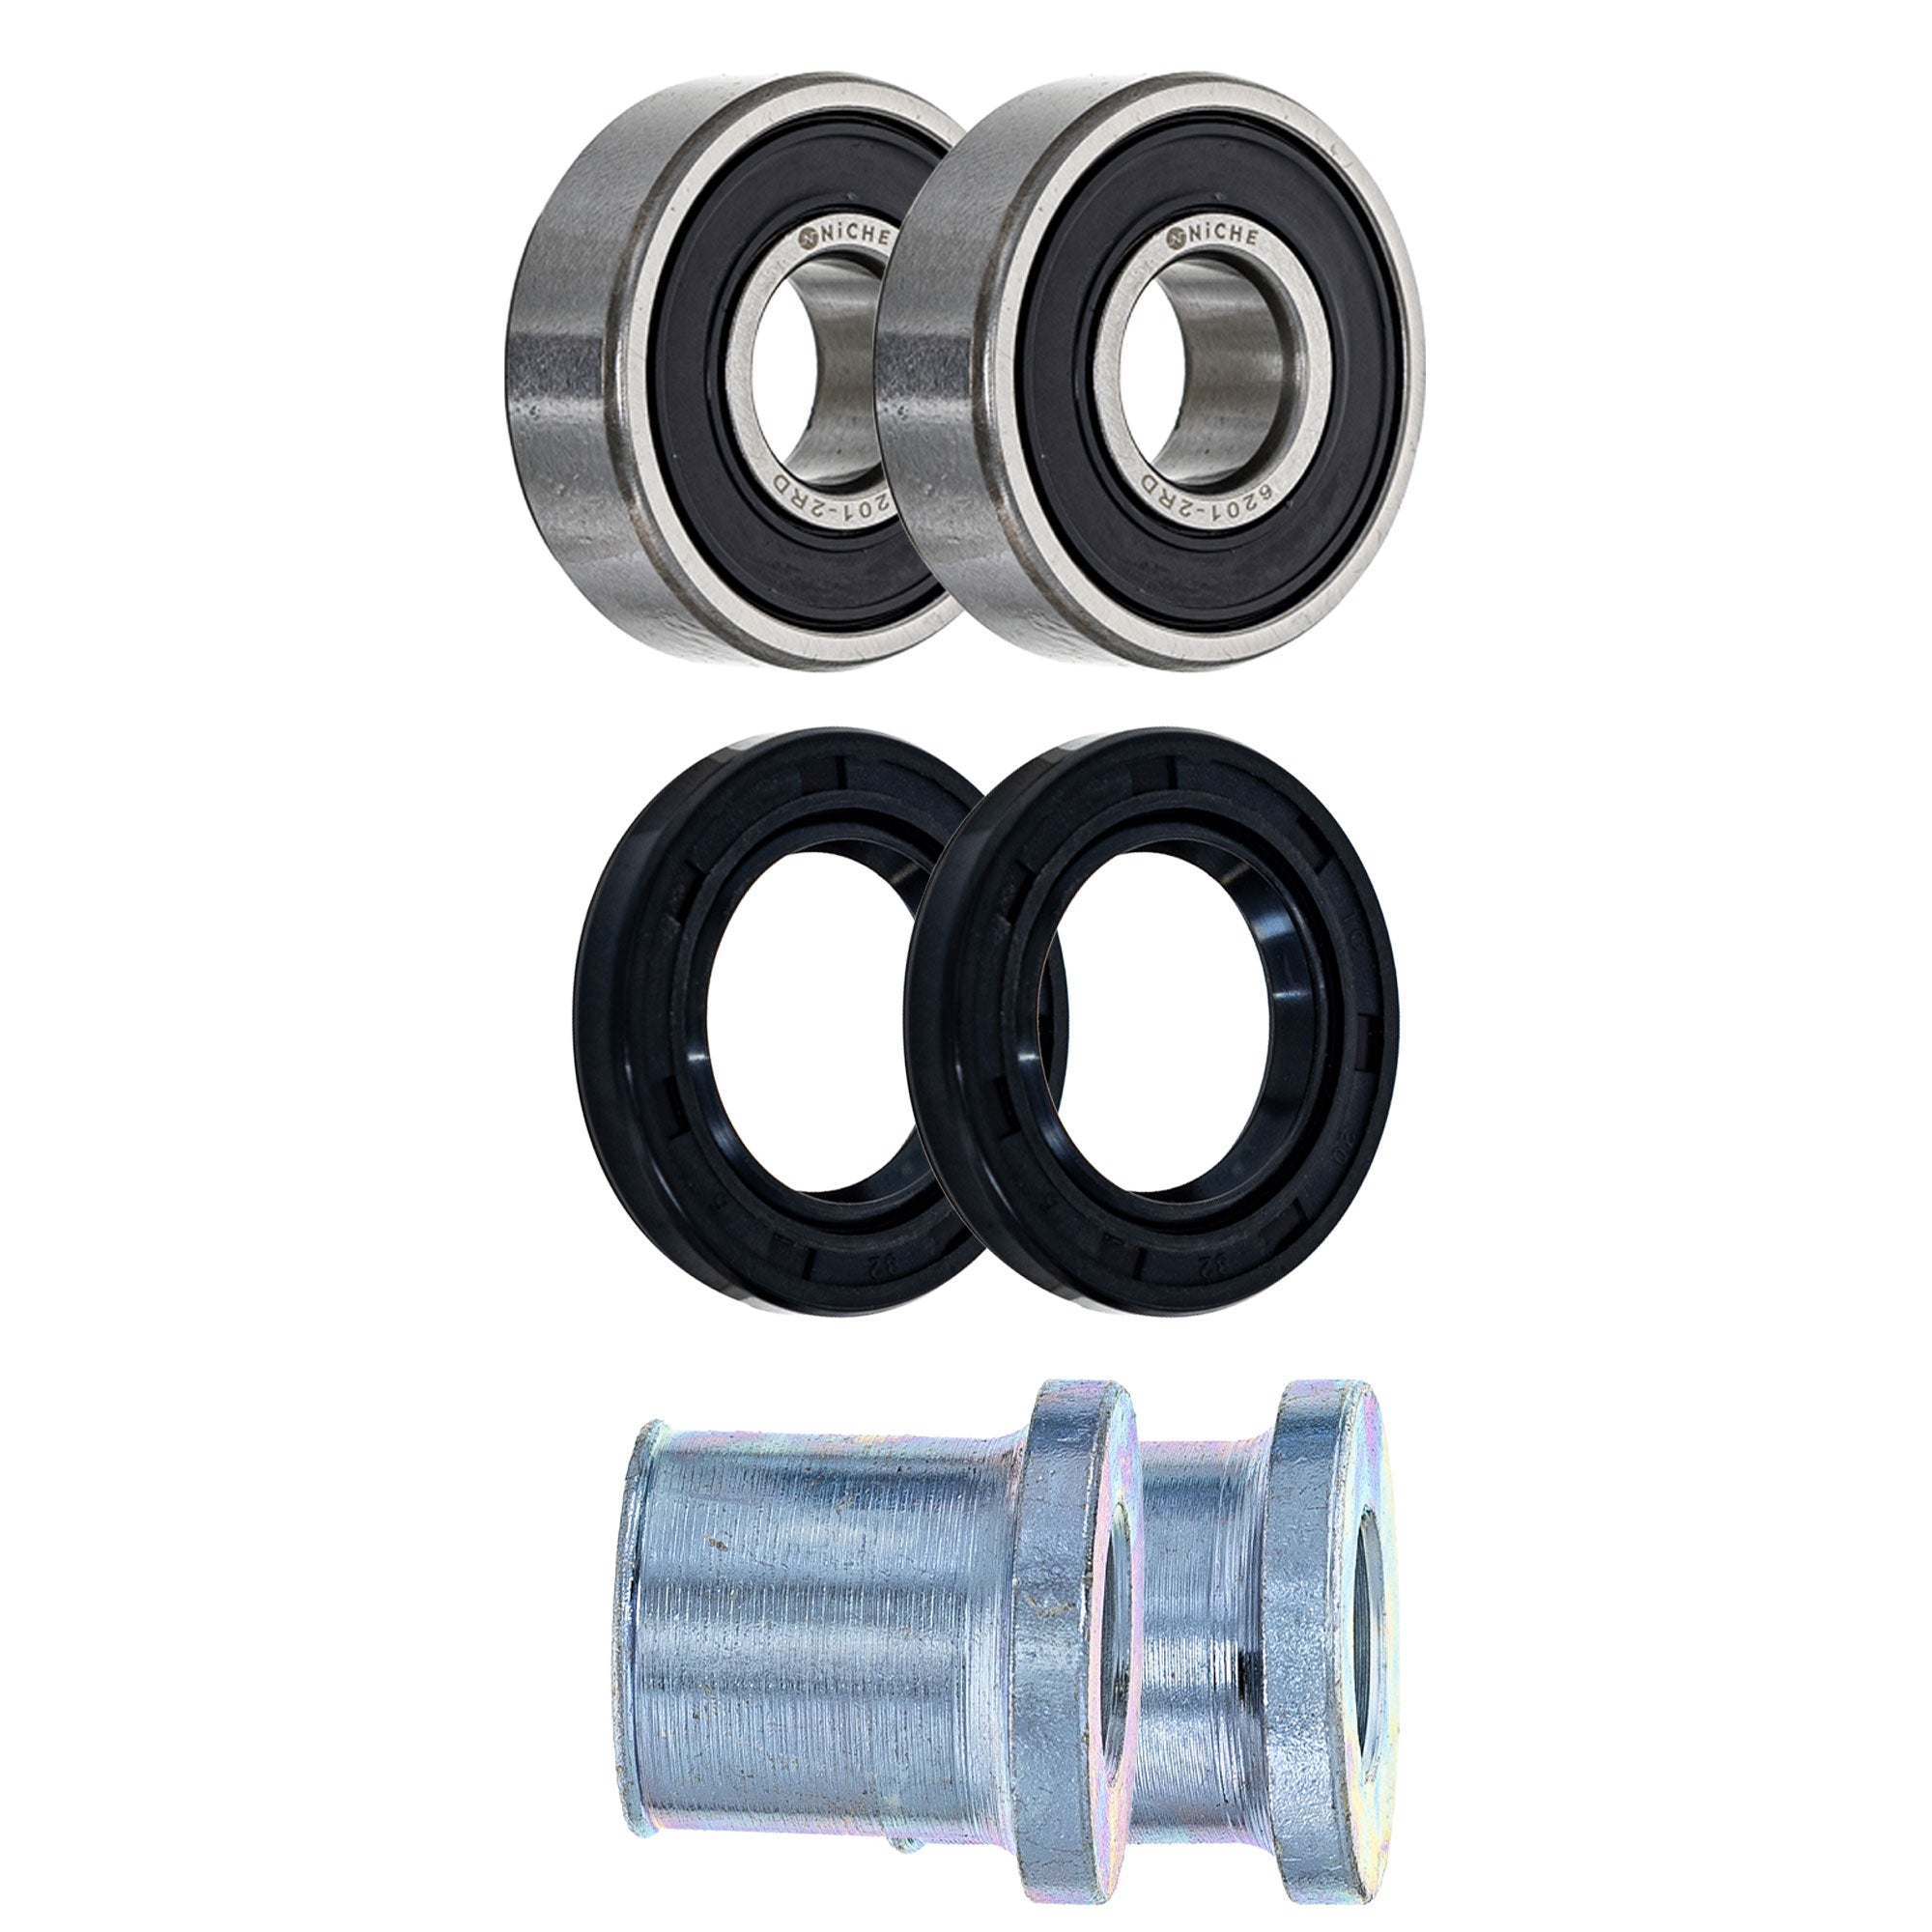 Wheel Bearing Spacer Seal Kit for zOTHER YZ85 YZ80 KX250 NICHE MK1009229